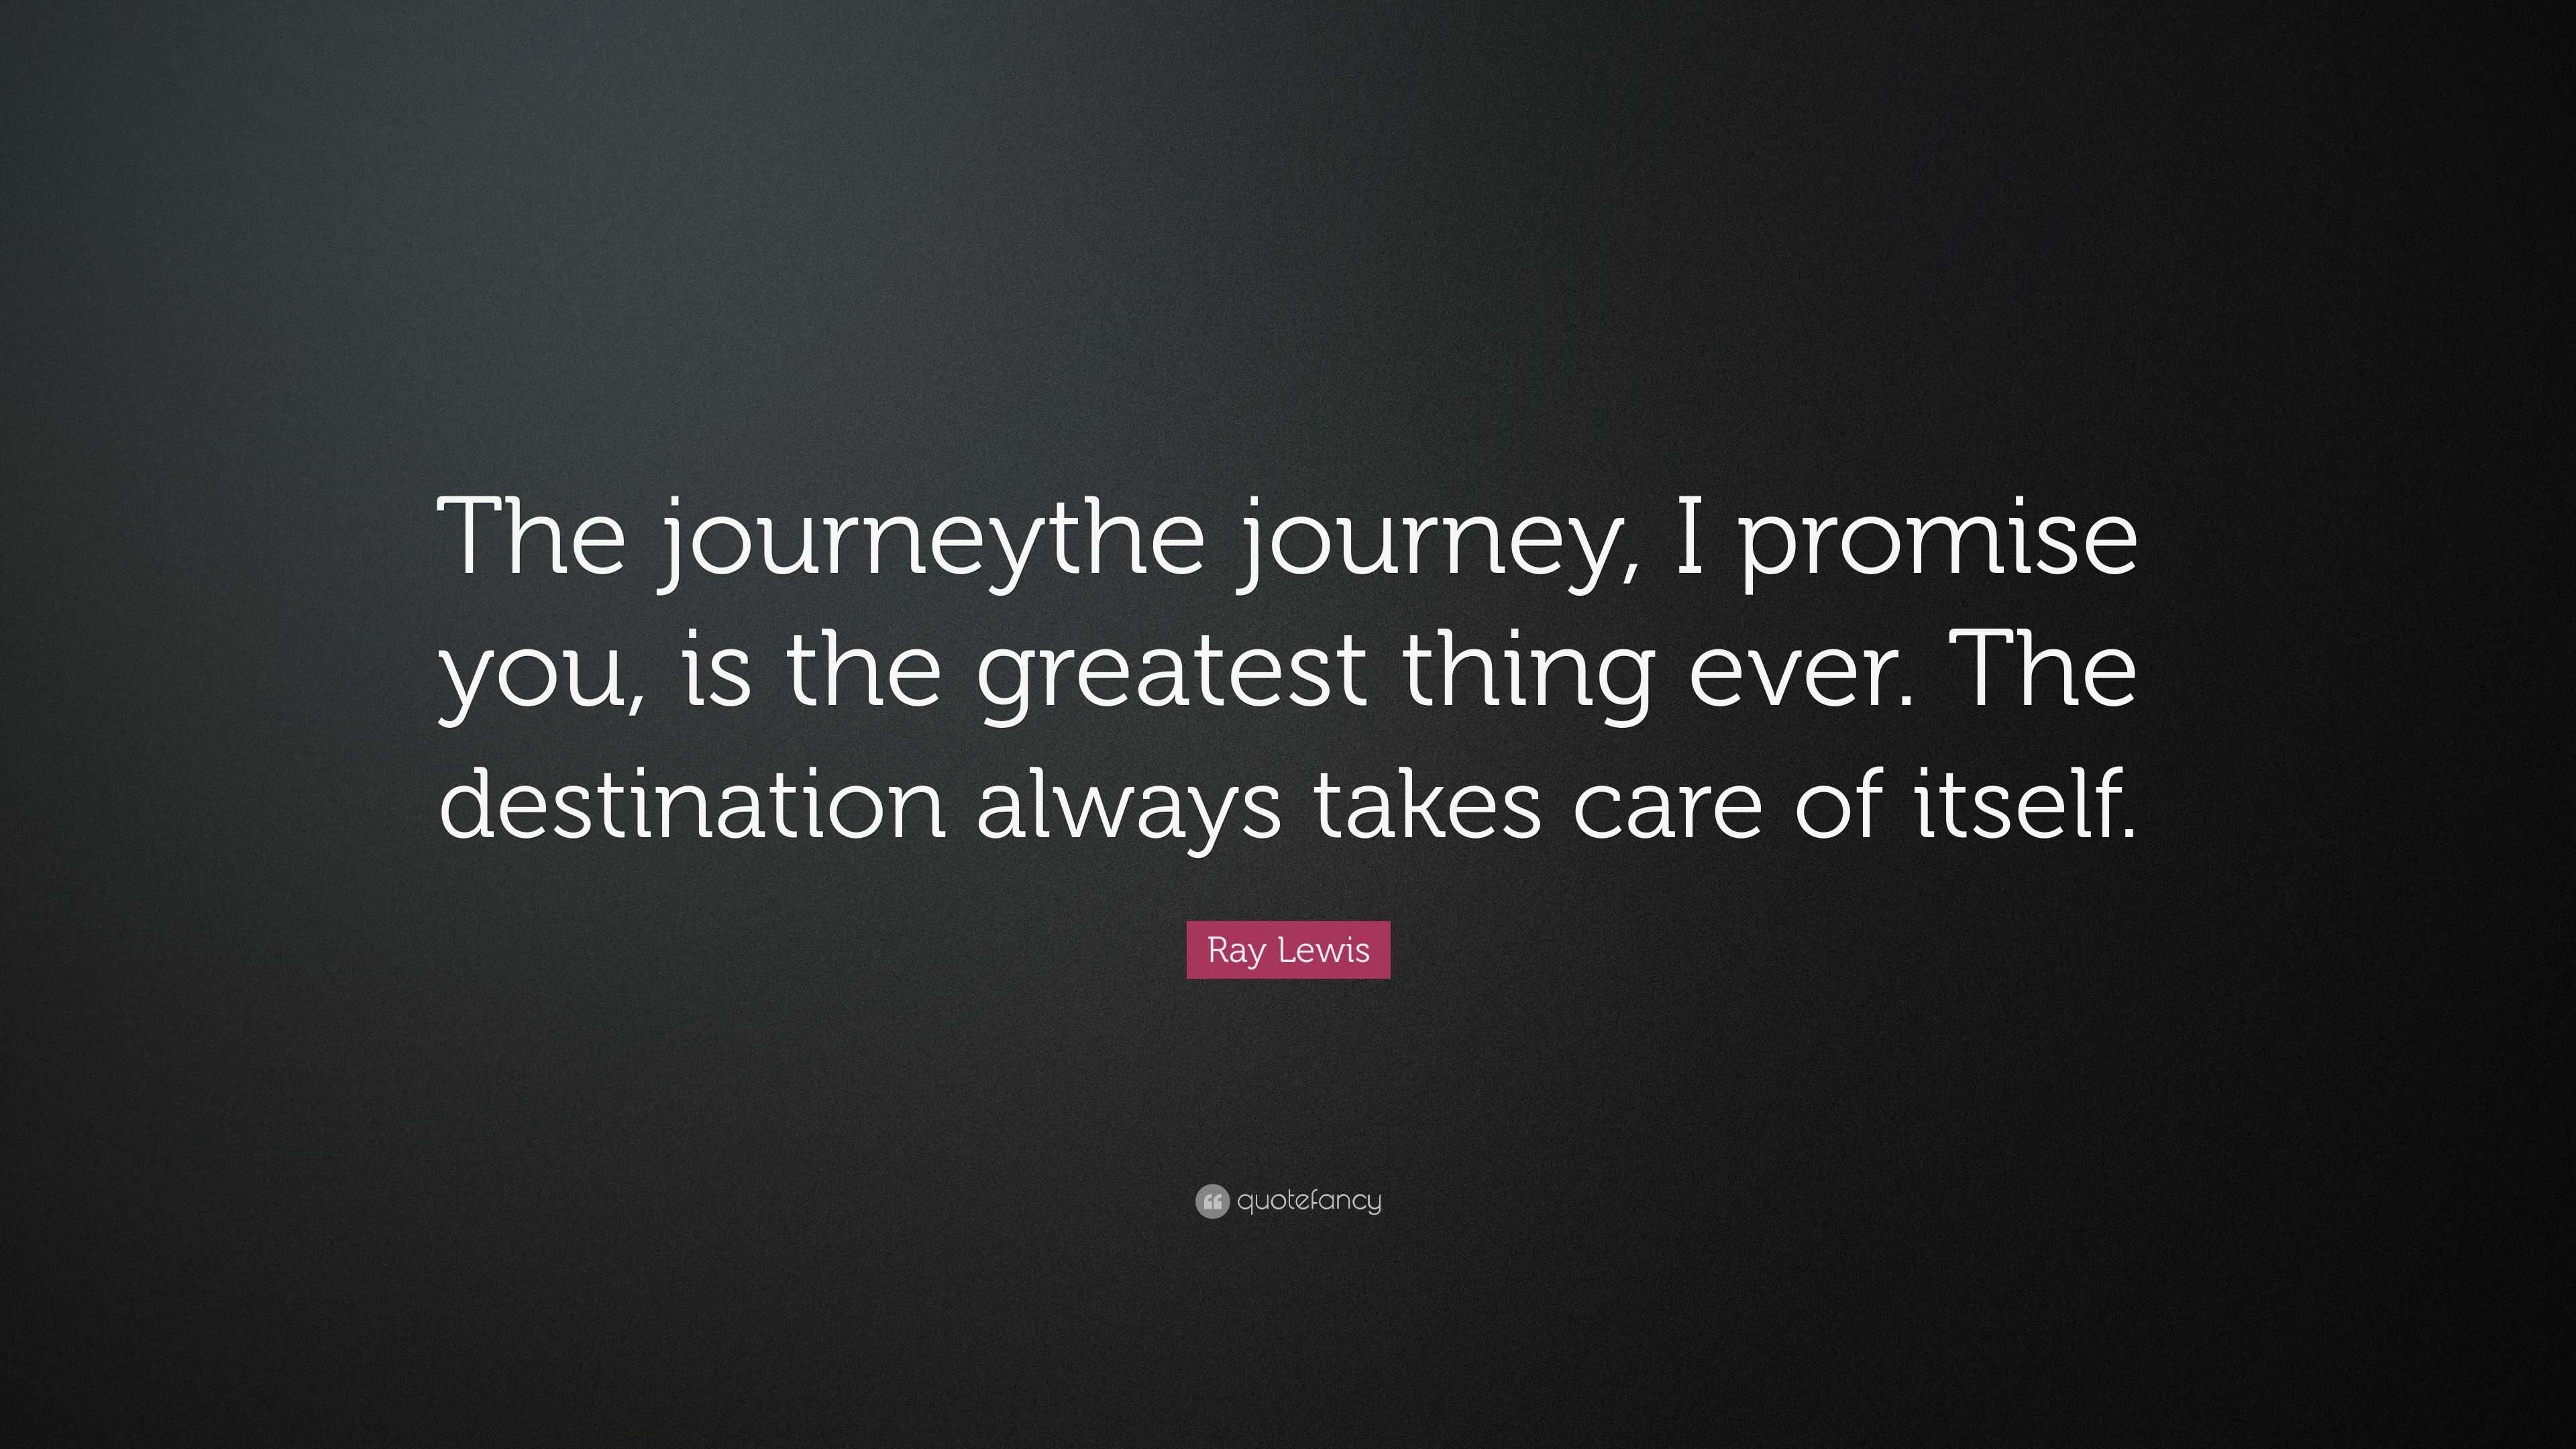 Ray Lewis Quote: “The journeythe journey, I promise you, is the ...